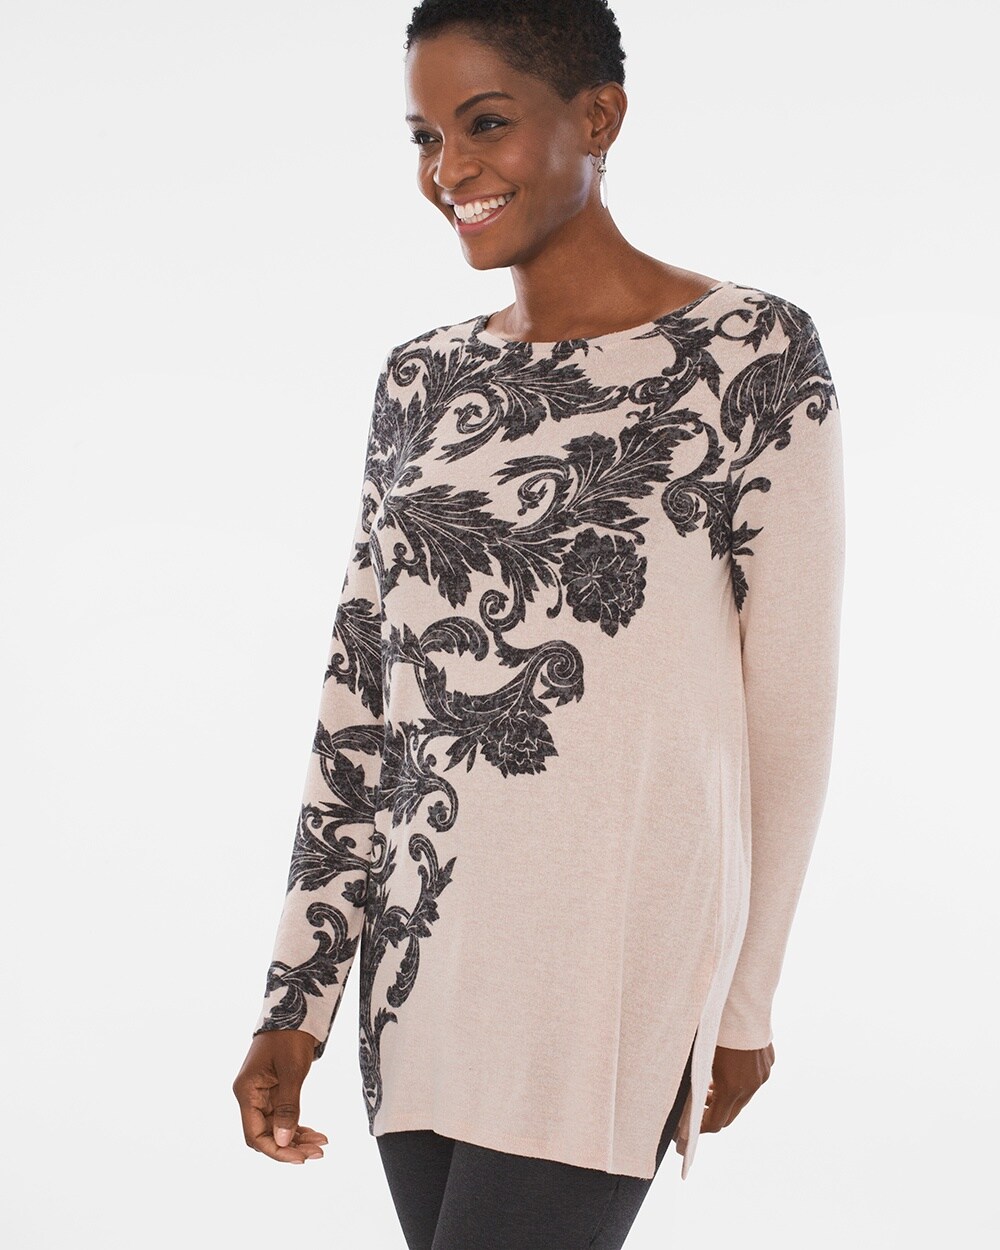 Zenergy Cozy Floral Scroll-Print Top